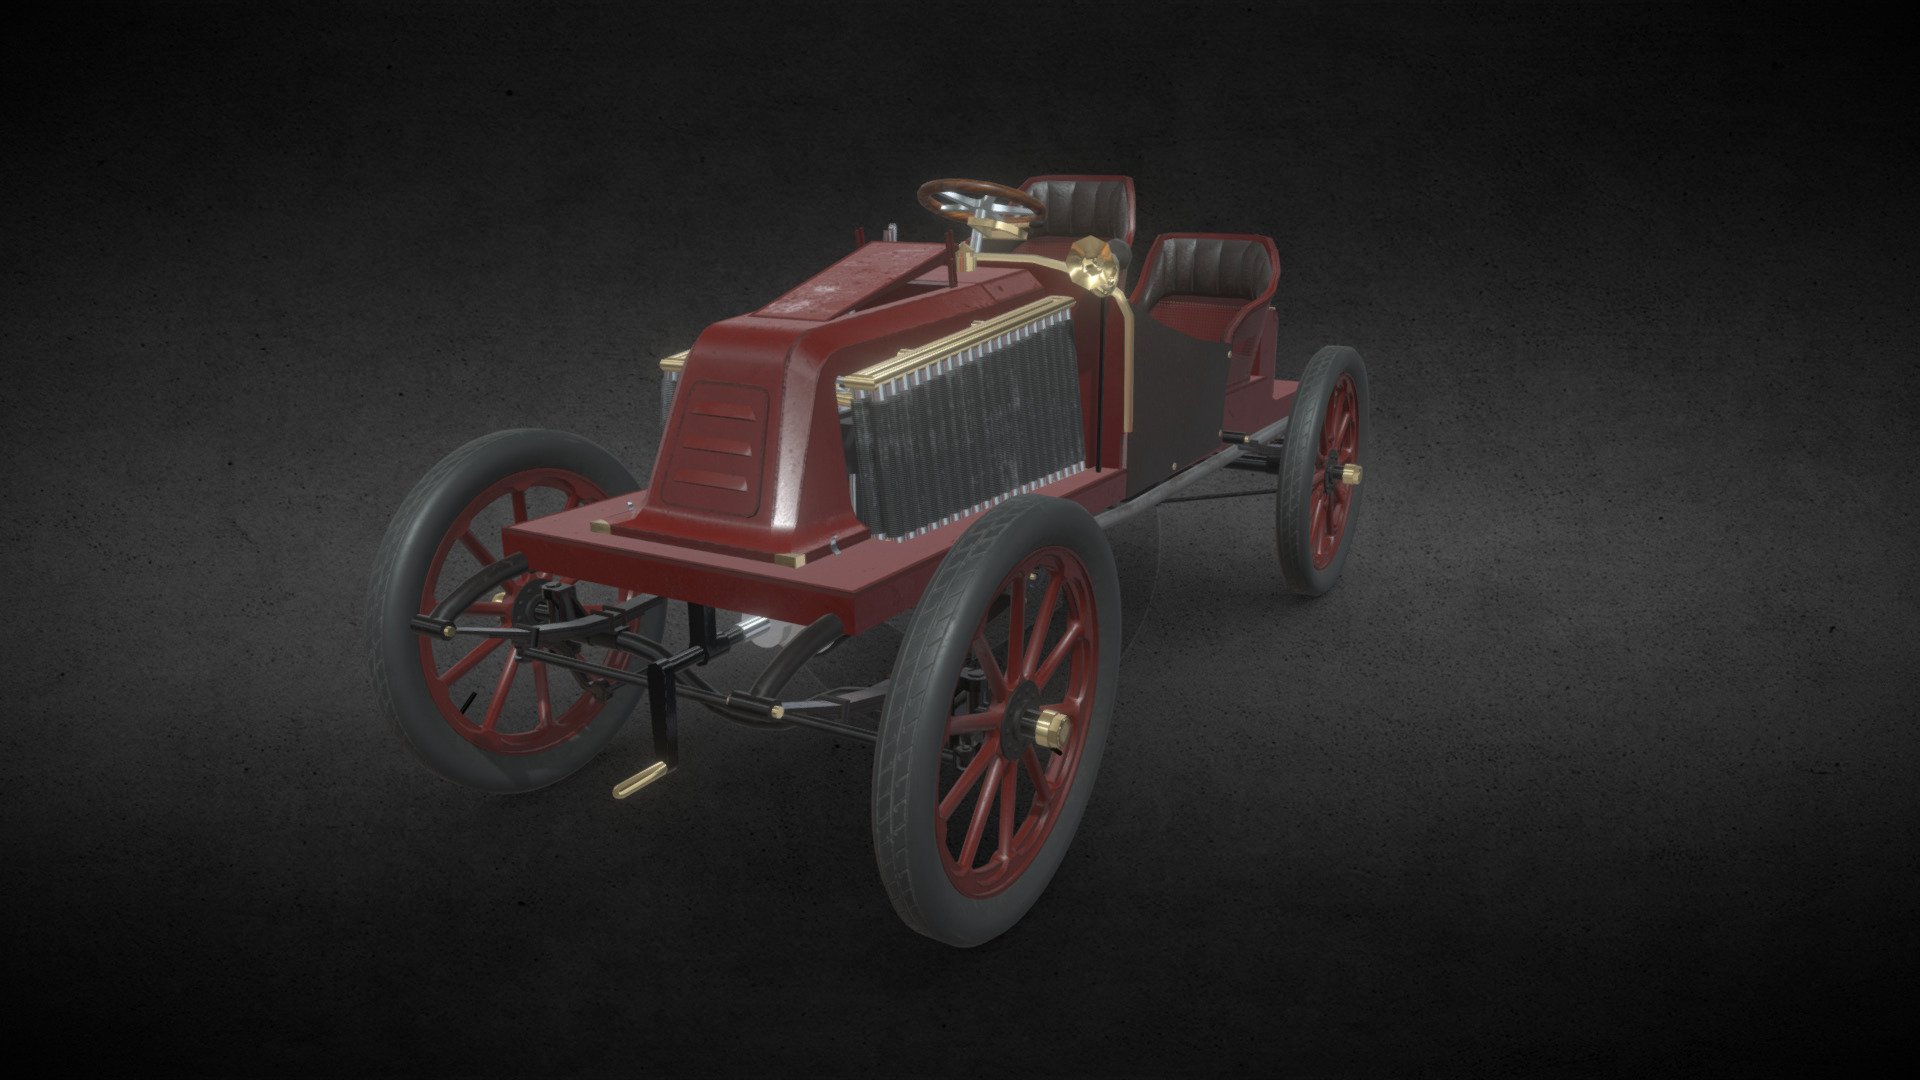 A simplified 3D model of Renault Type K from 1902. Version based on photos.

Model created in Blender 2.93. Textures made in Quixel Mixer.

I hope you'd like it :) - 1902 Renault Type K (photo based) - 3D model by KrStolorz 3d model